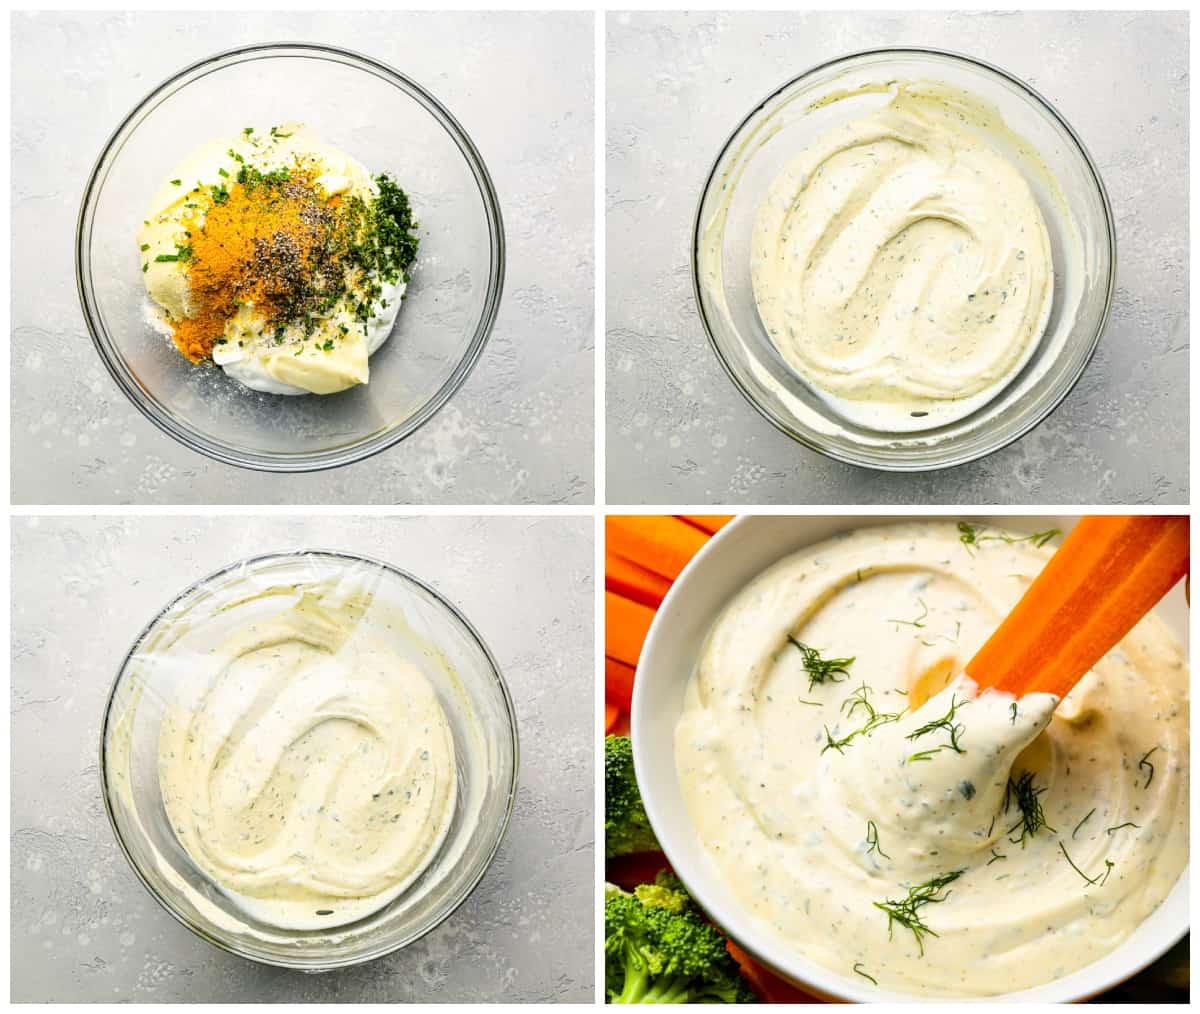 a series of photos showing how to make a sour cream, ranch, and dill dip for veggies.